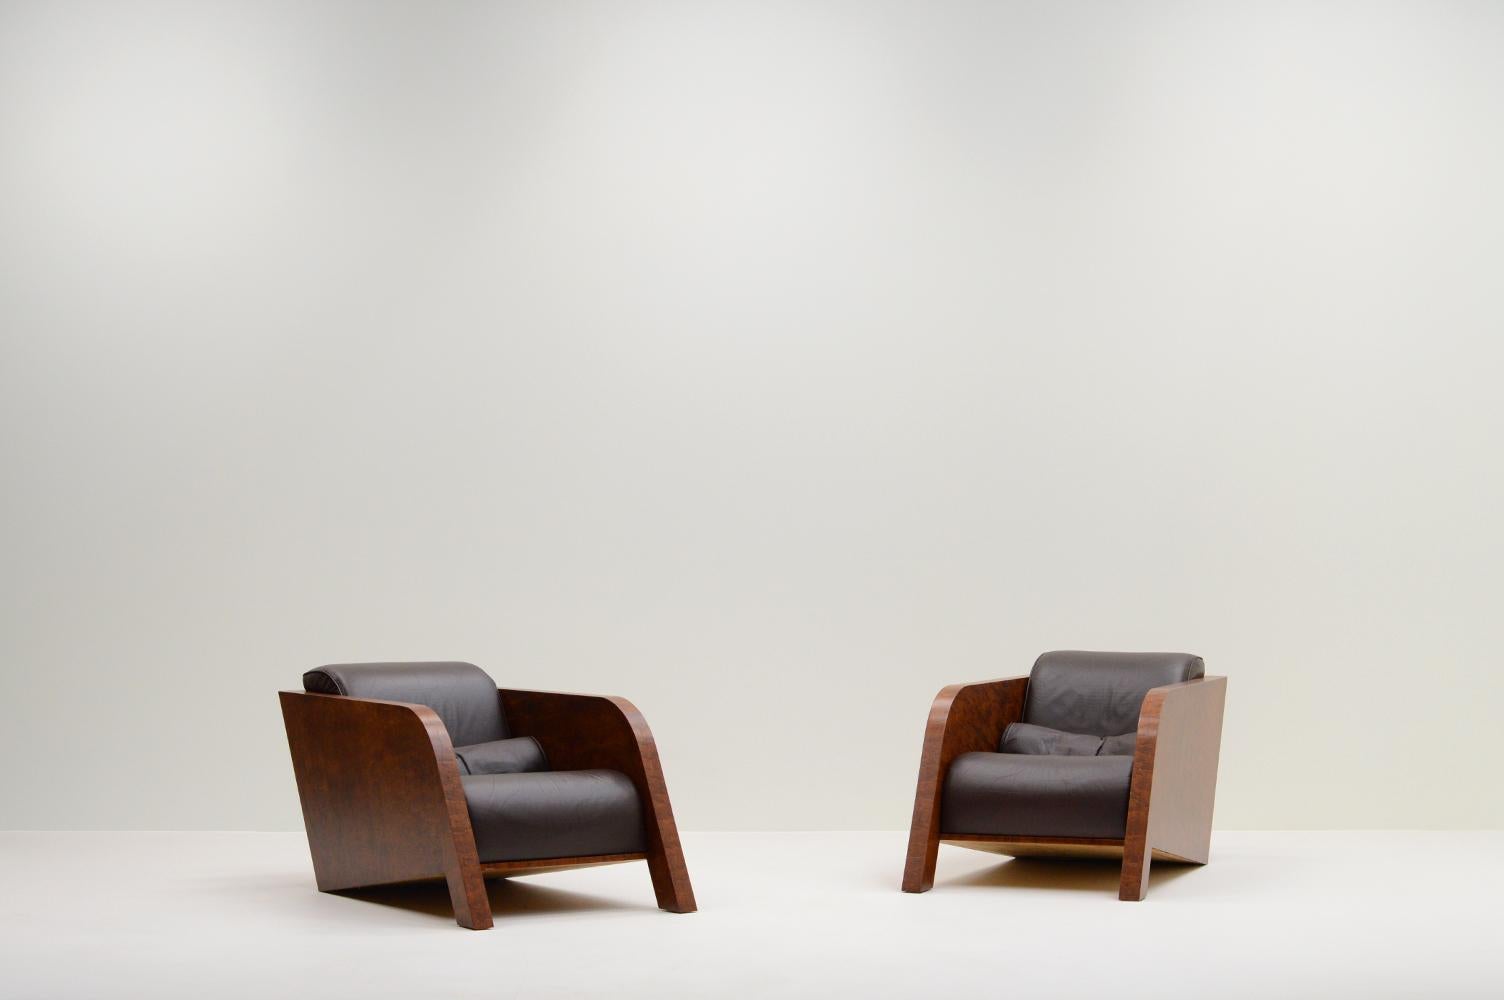 Set of 2 “Ypsilon” lounge chairs by Ulf Moritz, 1980s The Netherlands. The German designer lives and works in The Nederlands since 1962 and he is know for his fashion and curtain fabrics, upholstery, wall covering, rugs and interior accessories.